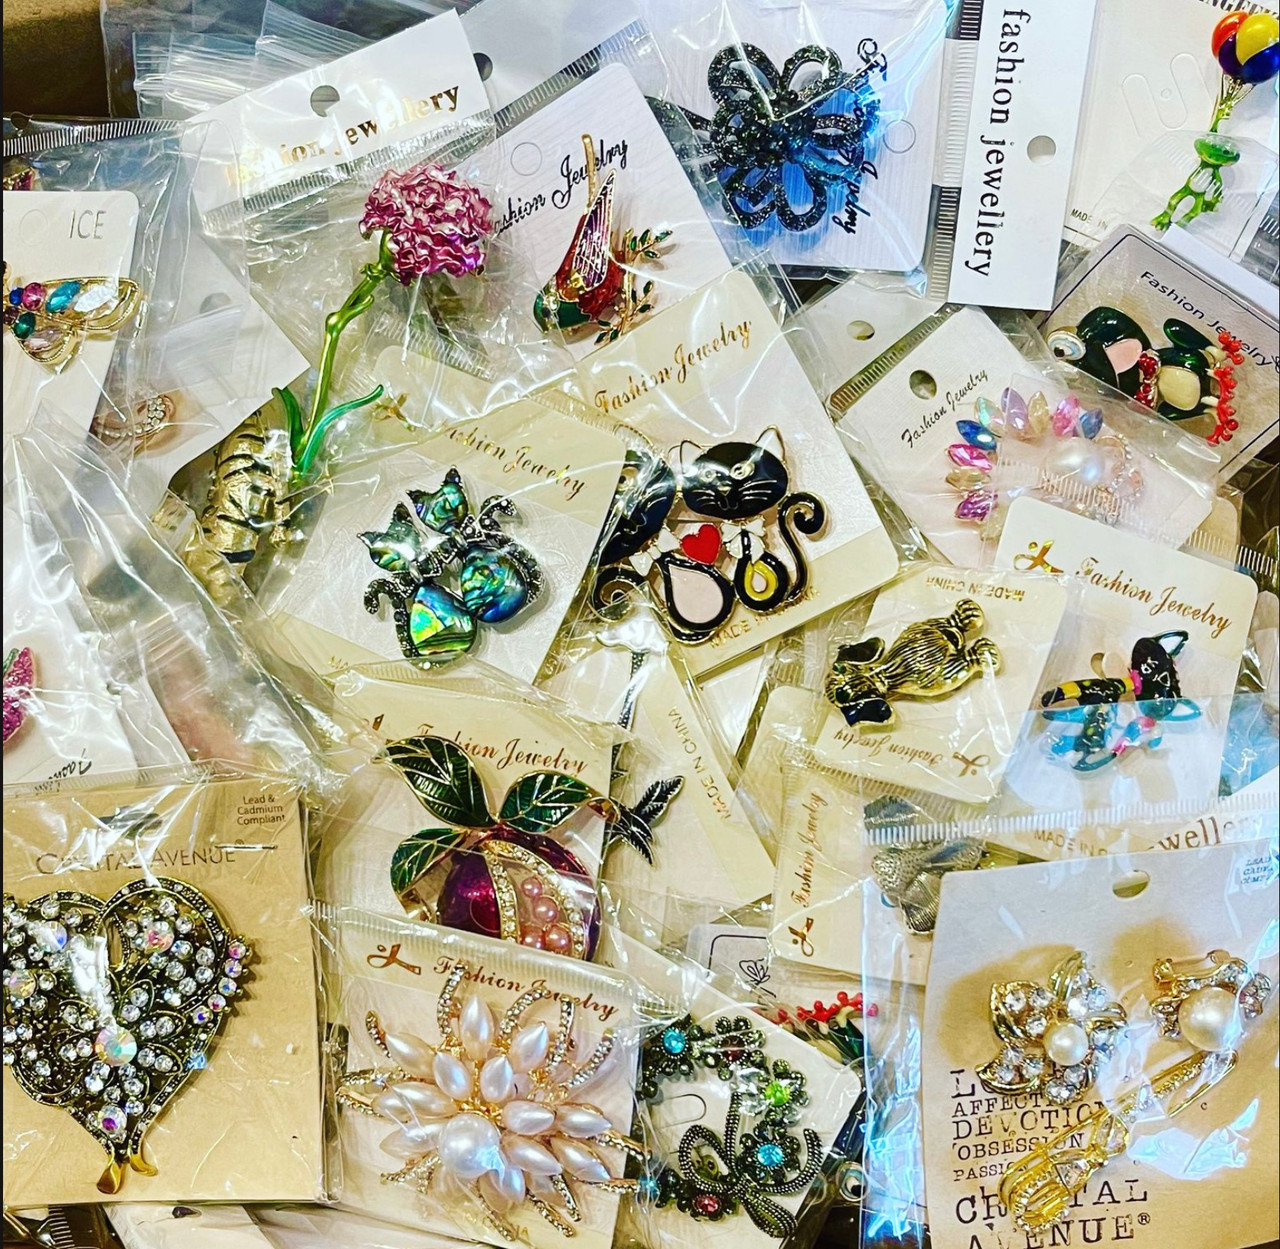 Wholesale Pins, Brooches and Broaches by the Dozen